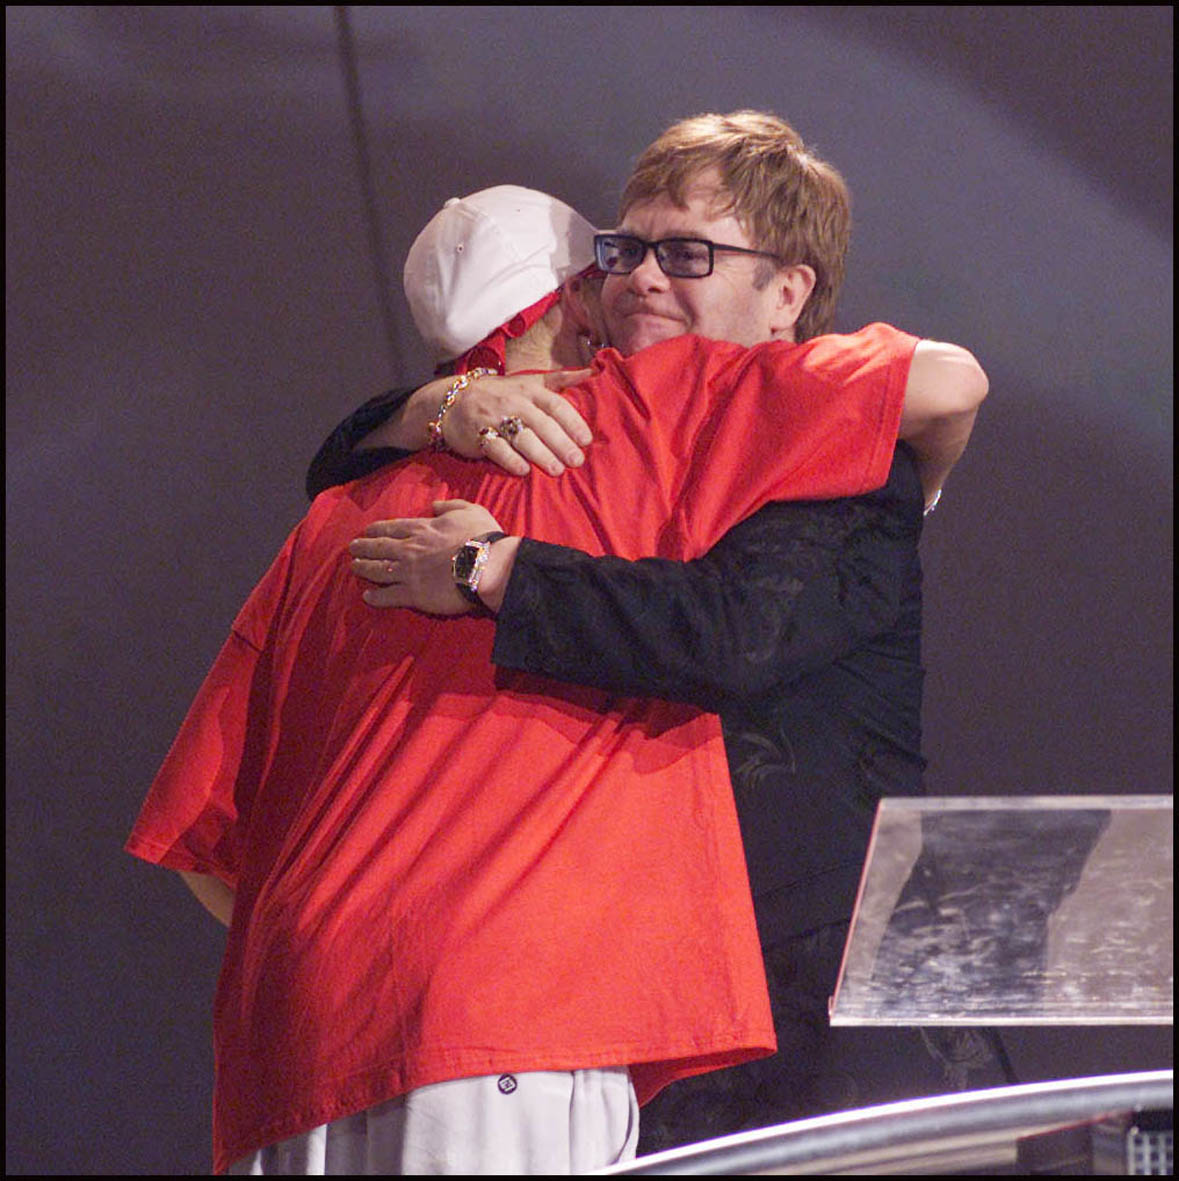 LONDON - FEBRUARY 26: American rap star Eminem accepts an award from British musician Sir Elton John on stage at the 2001 Brit Awards held at Earls Court Exhibition Centre on February 26, 2001 in London. (Photo by Dave Hogan/Getty Images)